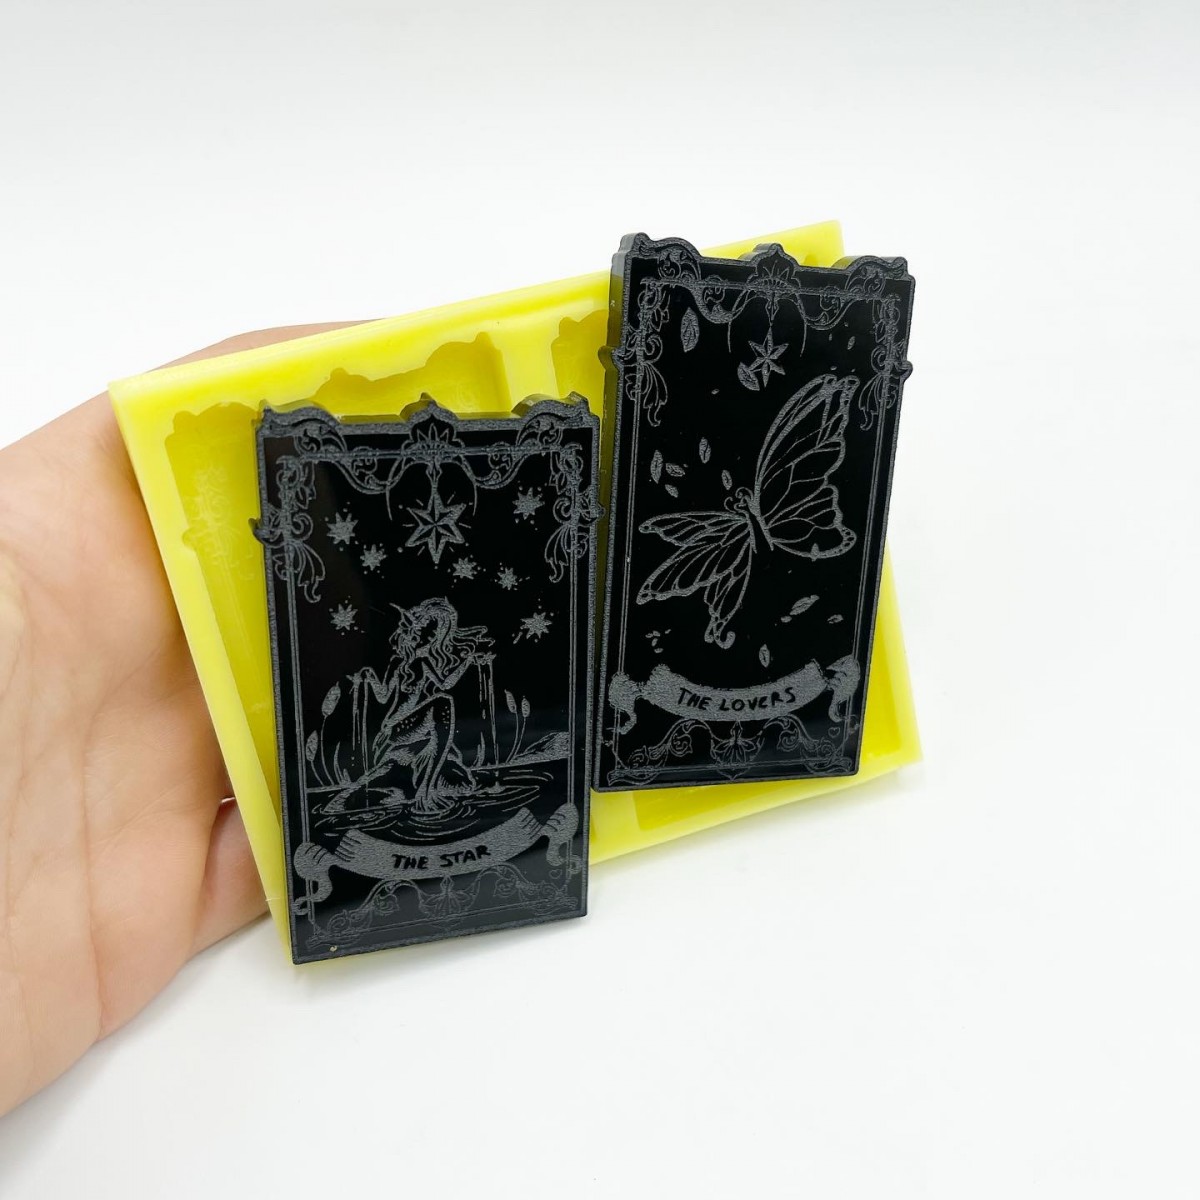 Set of "The Star" and "The Lovers" Tarot Cards Mold - medium size